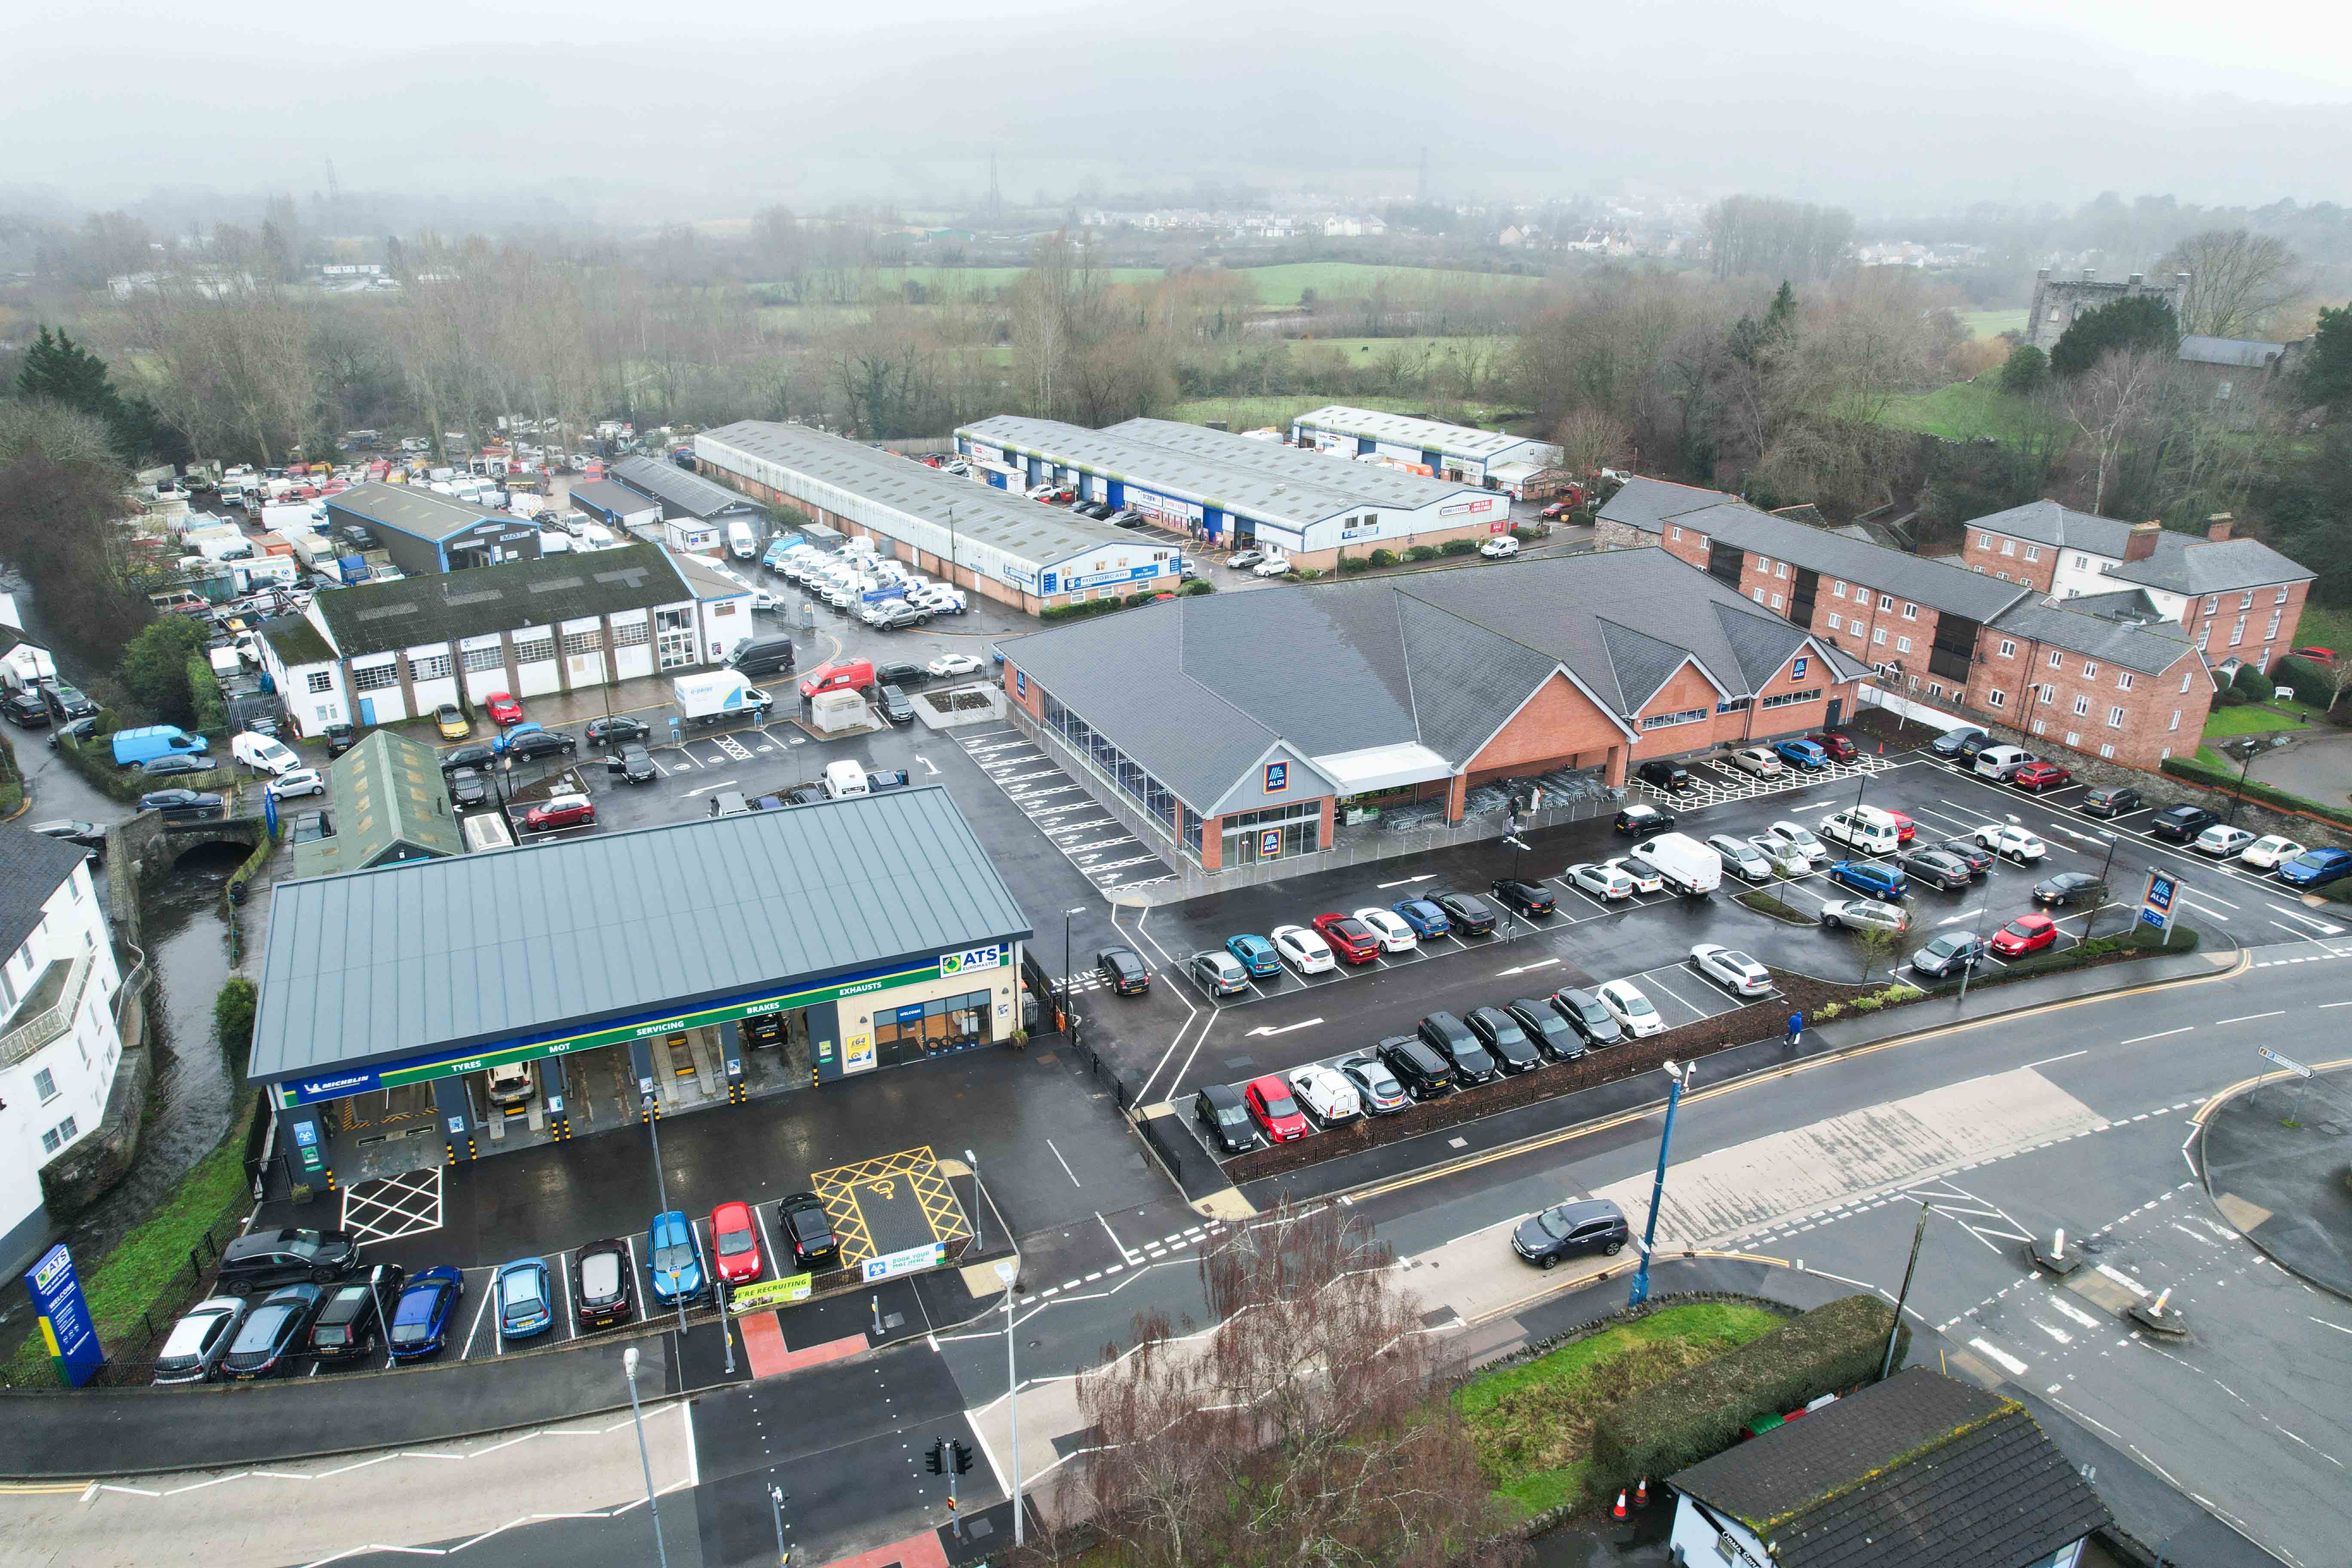 Abergavenny Aldi and ATS from the air